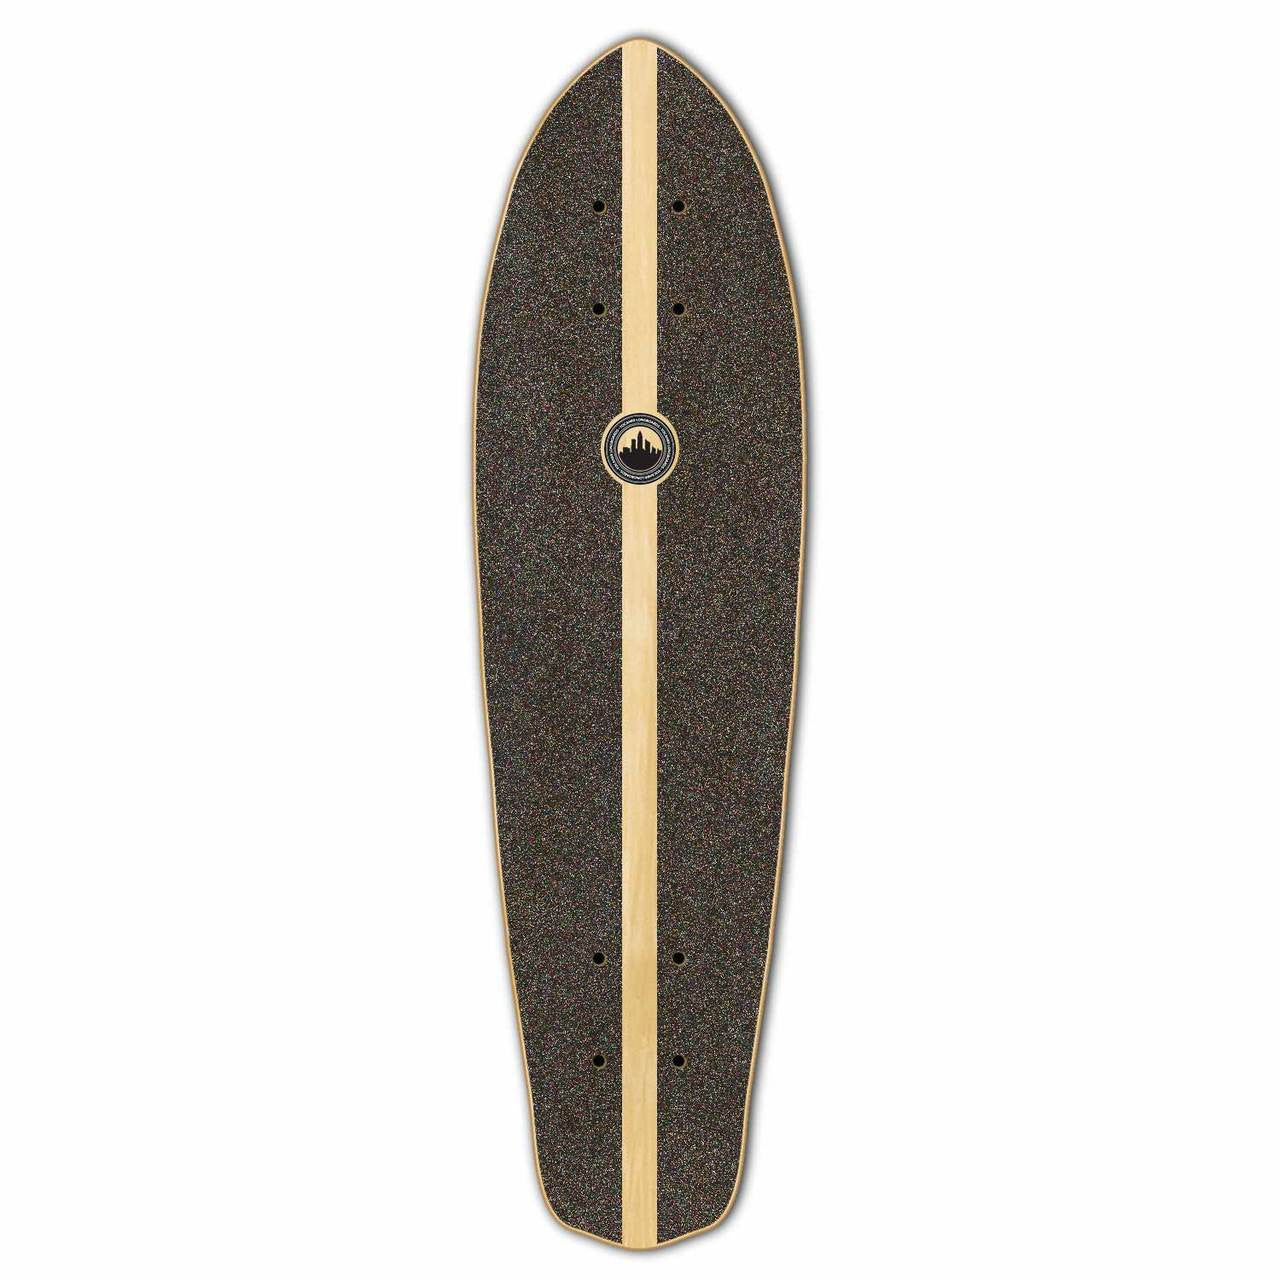 Yocaher Micro Cruiser Deck - Black Blind Justice